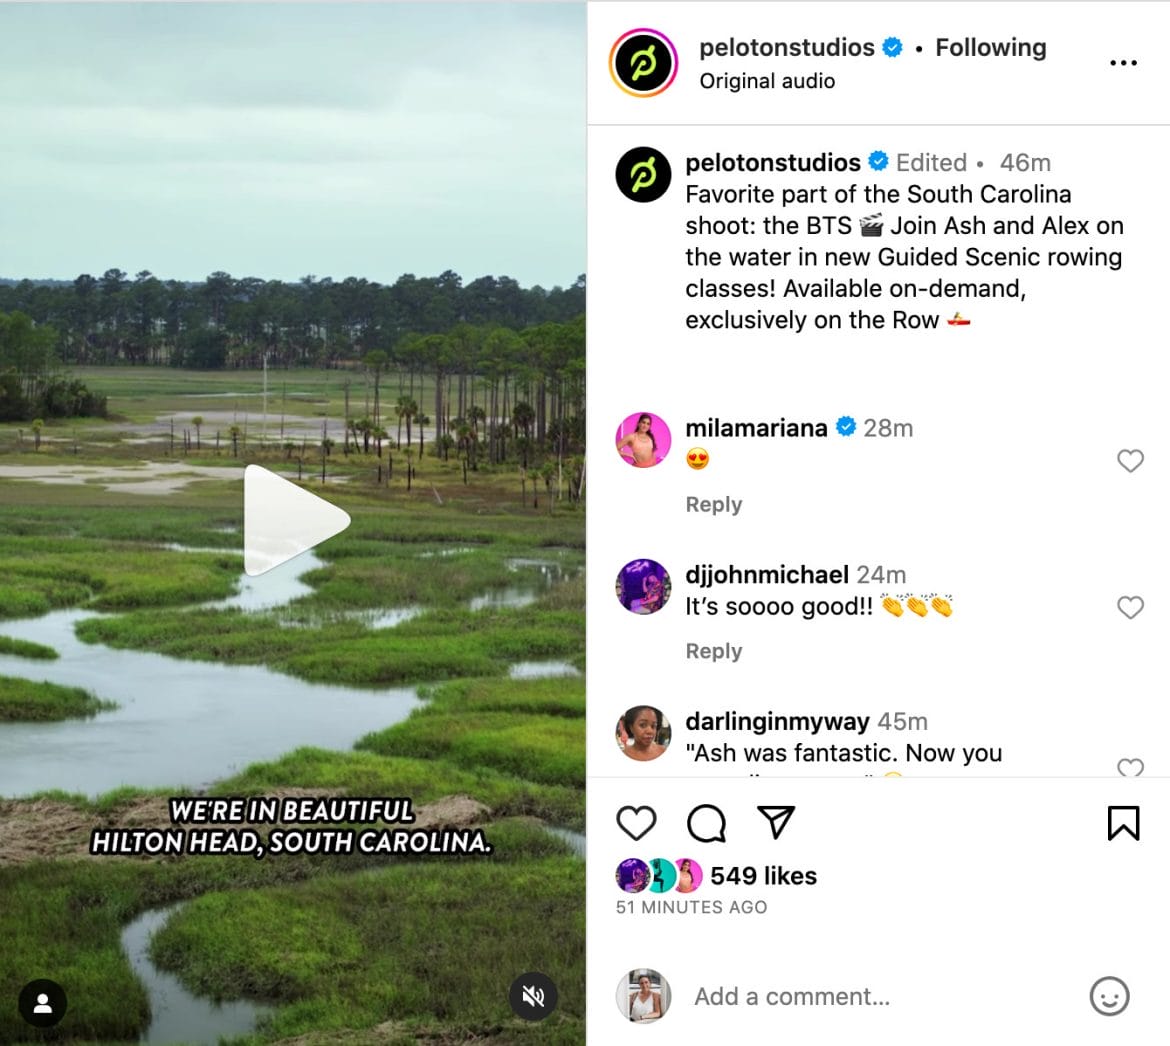 @PelotonStudios Instagram post announcing new guided scenic rowing content.